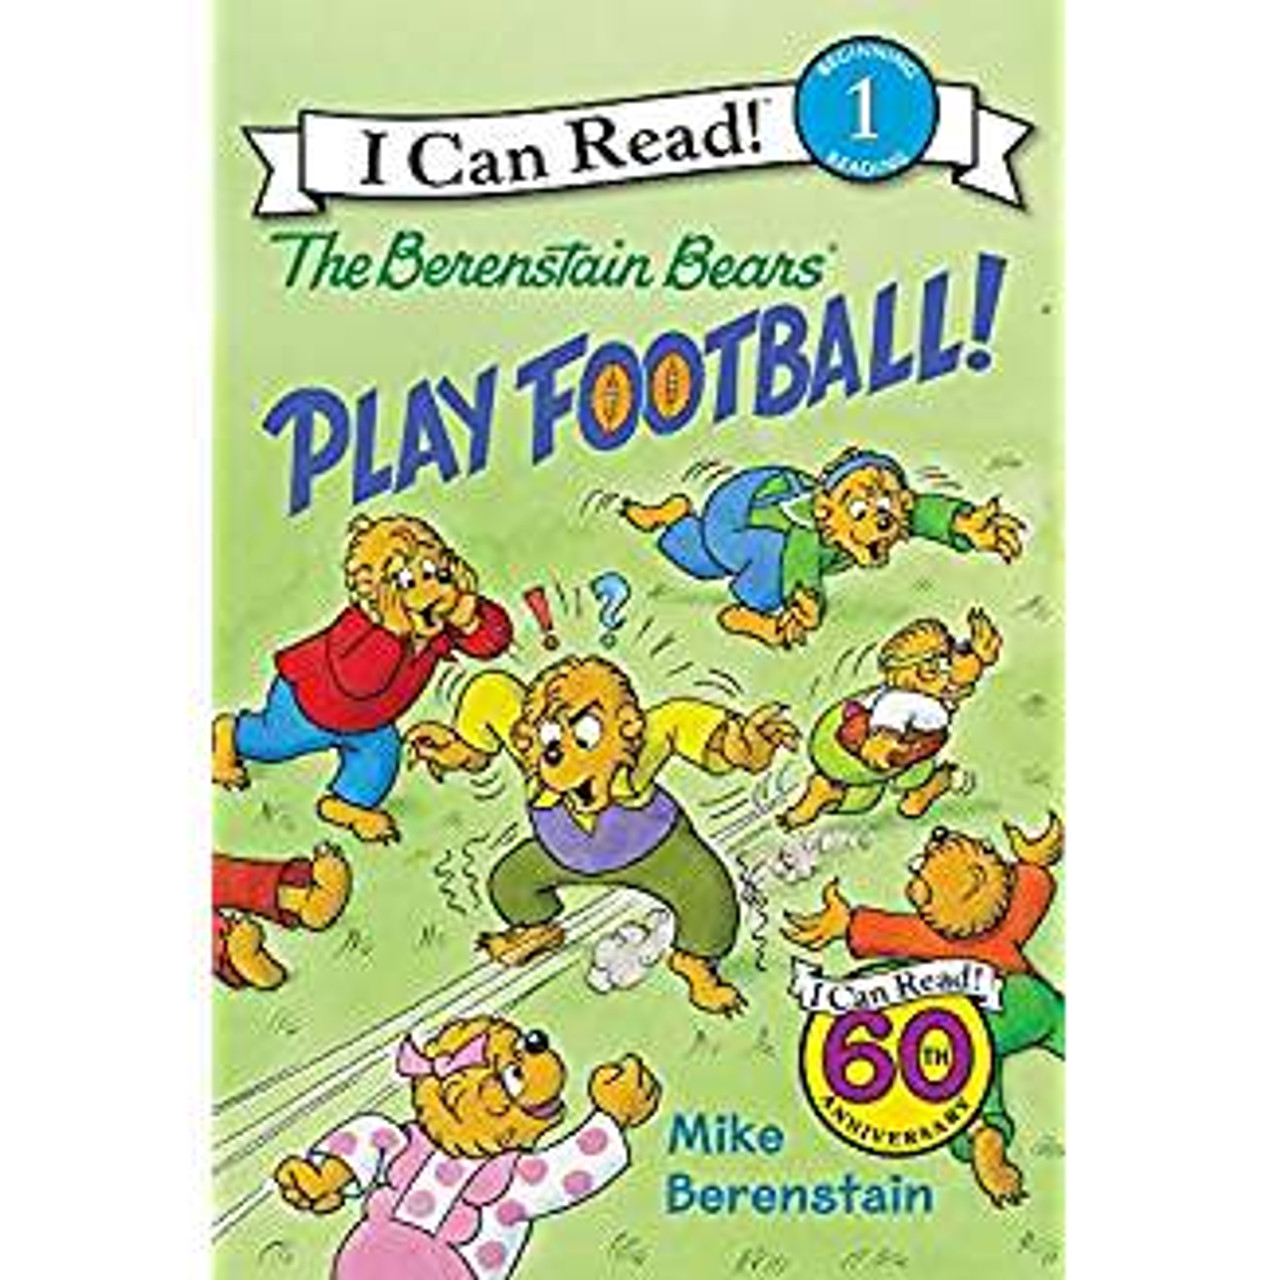 The Berenstain Bears enjoy a fun-filled day outdoors playing football with their friends.